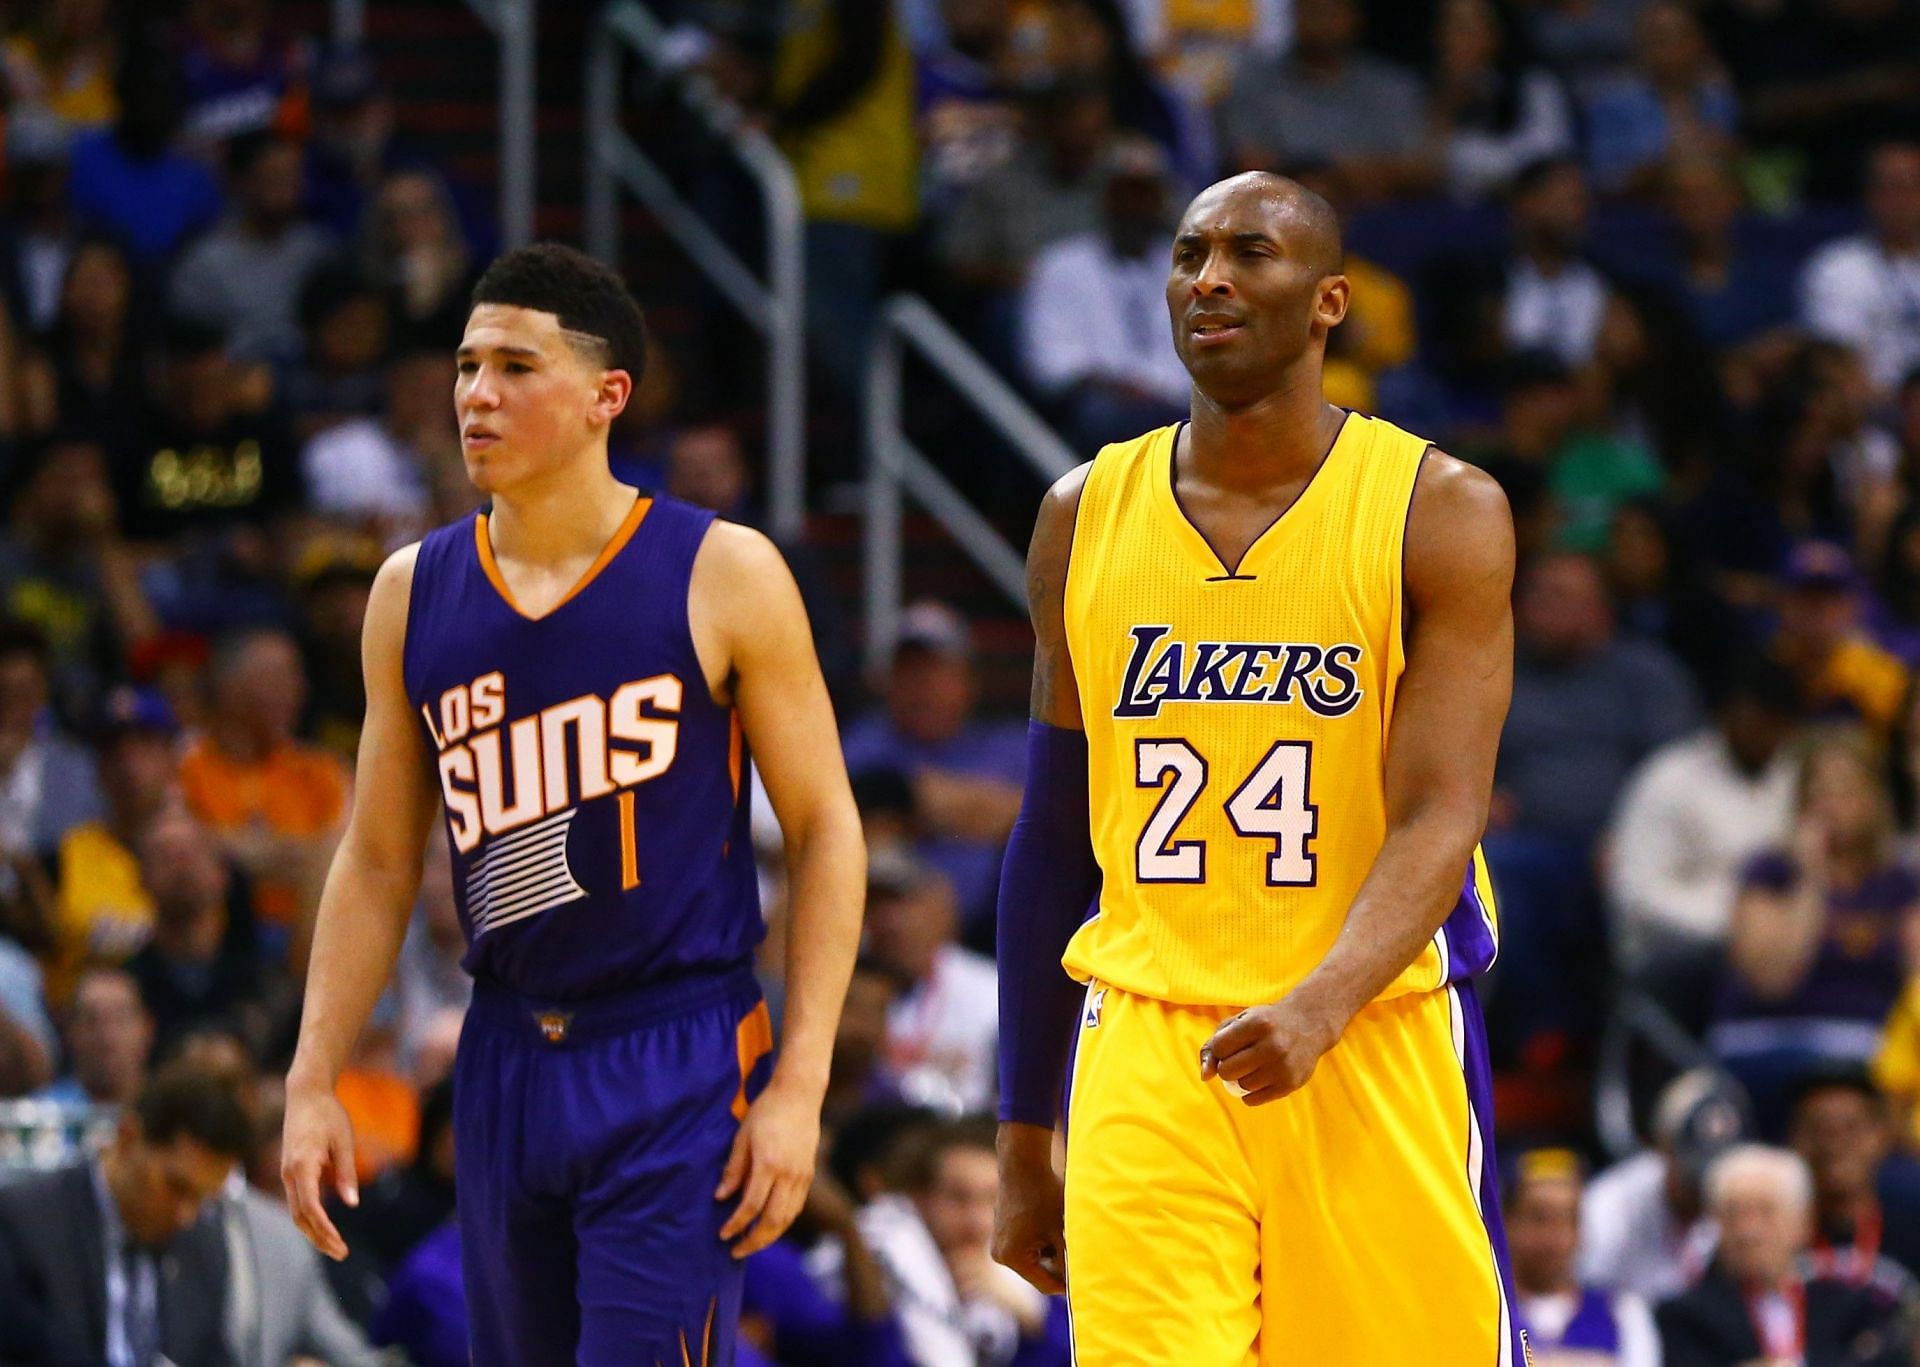 Kobe Bryant talked about what it felt like playing against Devin Booker for the first time